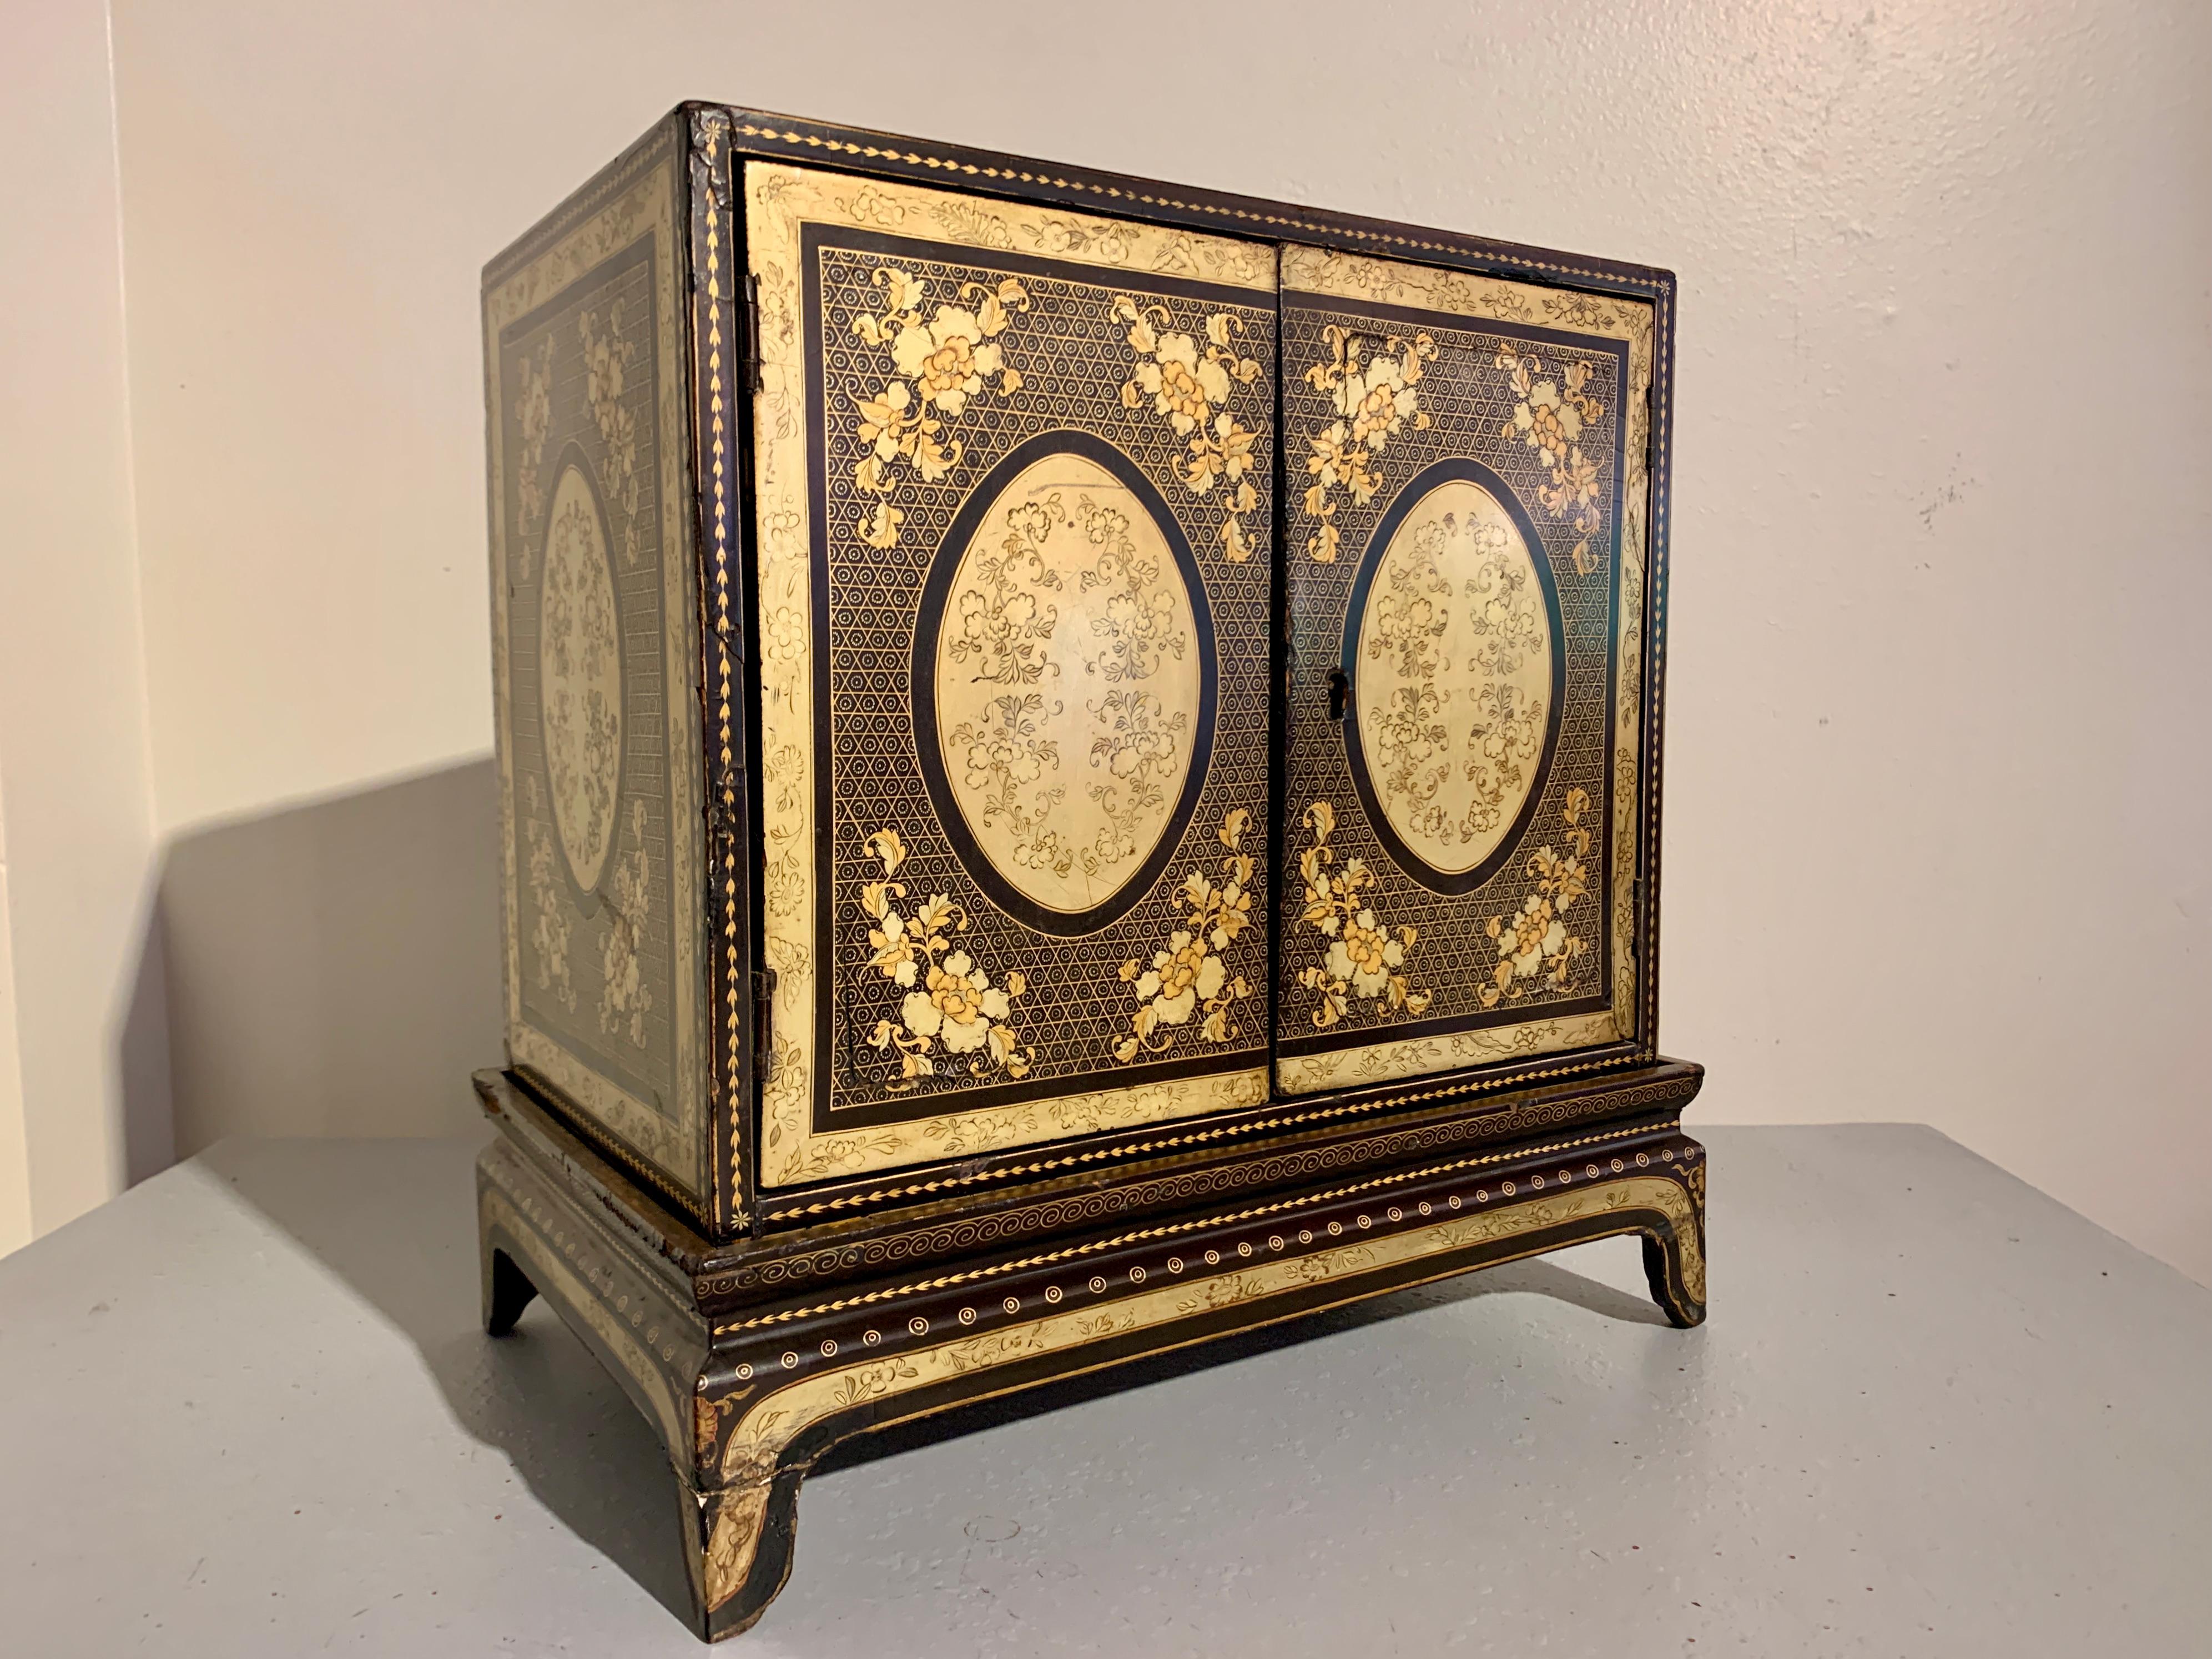 An exquisite small Chinese export cabinet on stand, black lacquer and gilt painted, early to mid 19th century, China. 

The small lacquer cabinet of black lacquer with stunning gilt painted designs of peonies against a meticulous geometric diaper